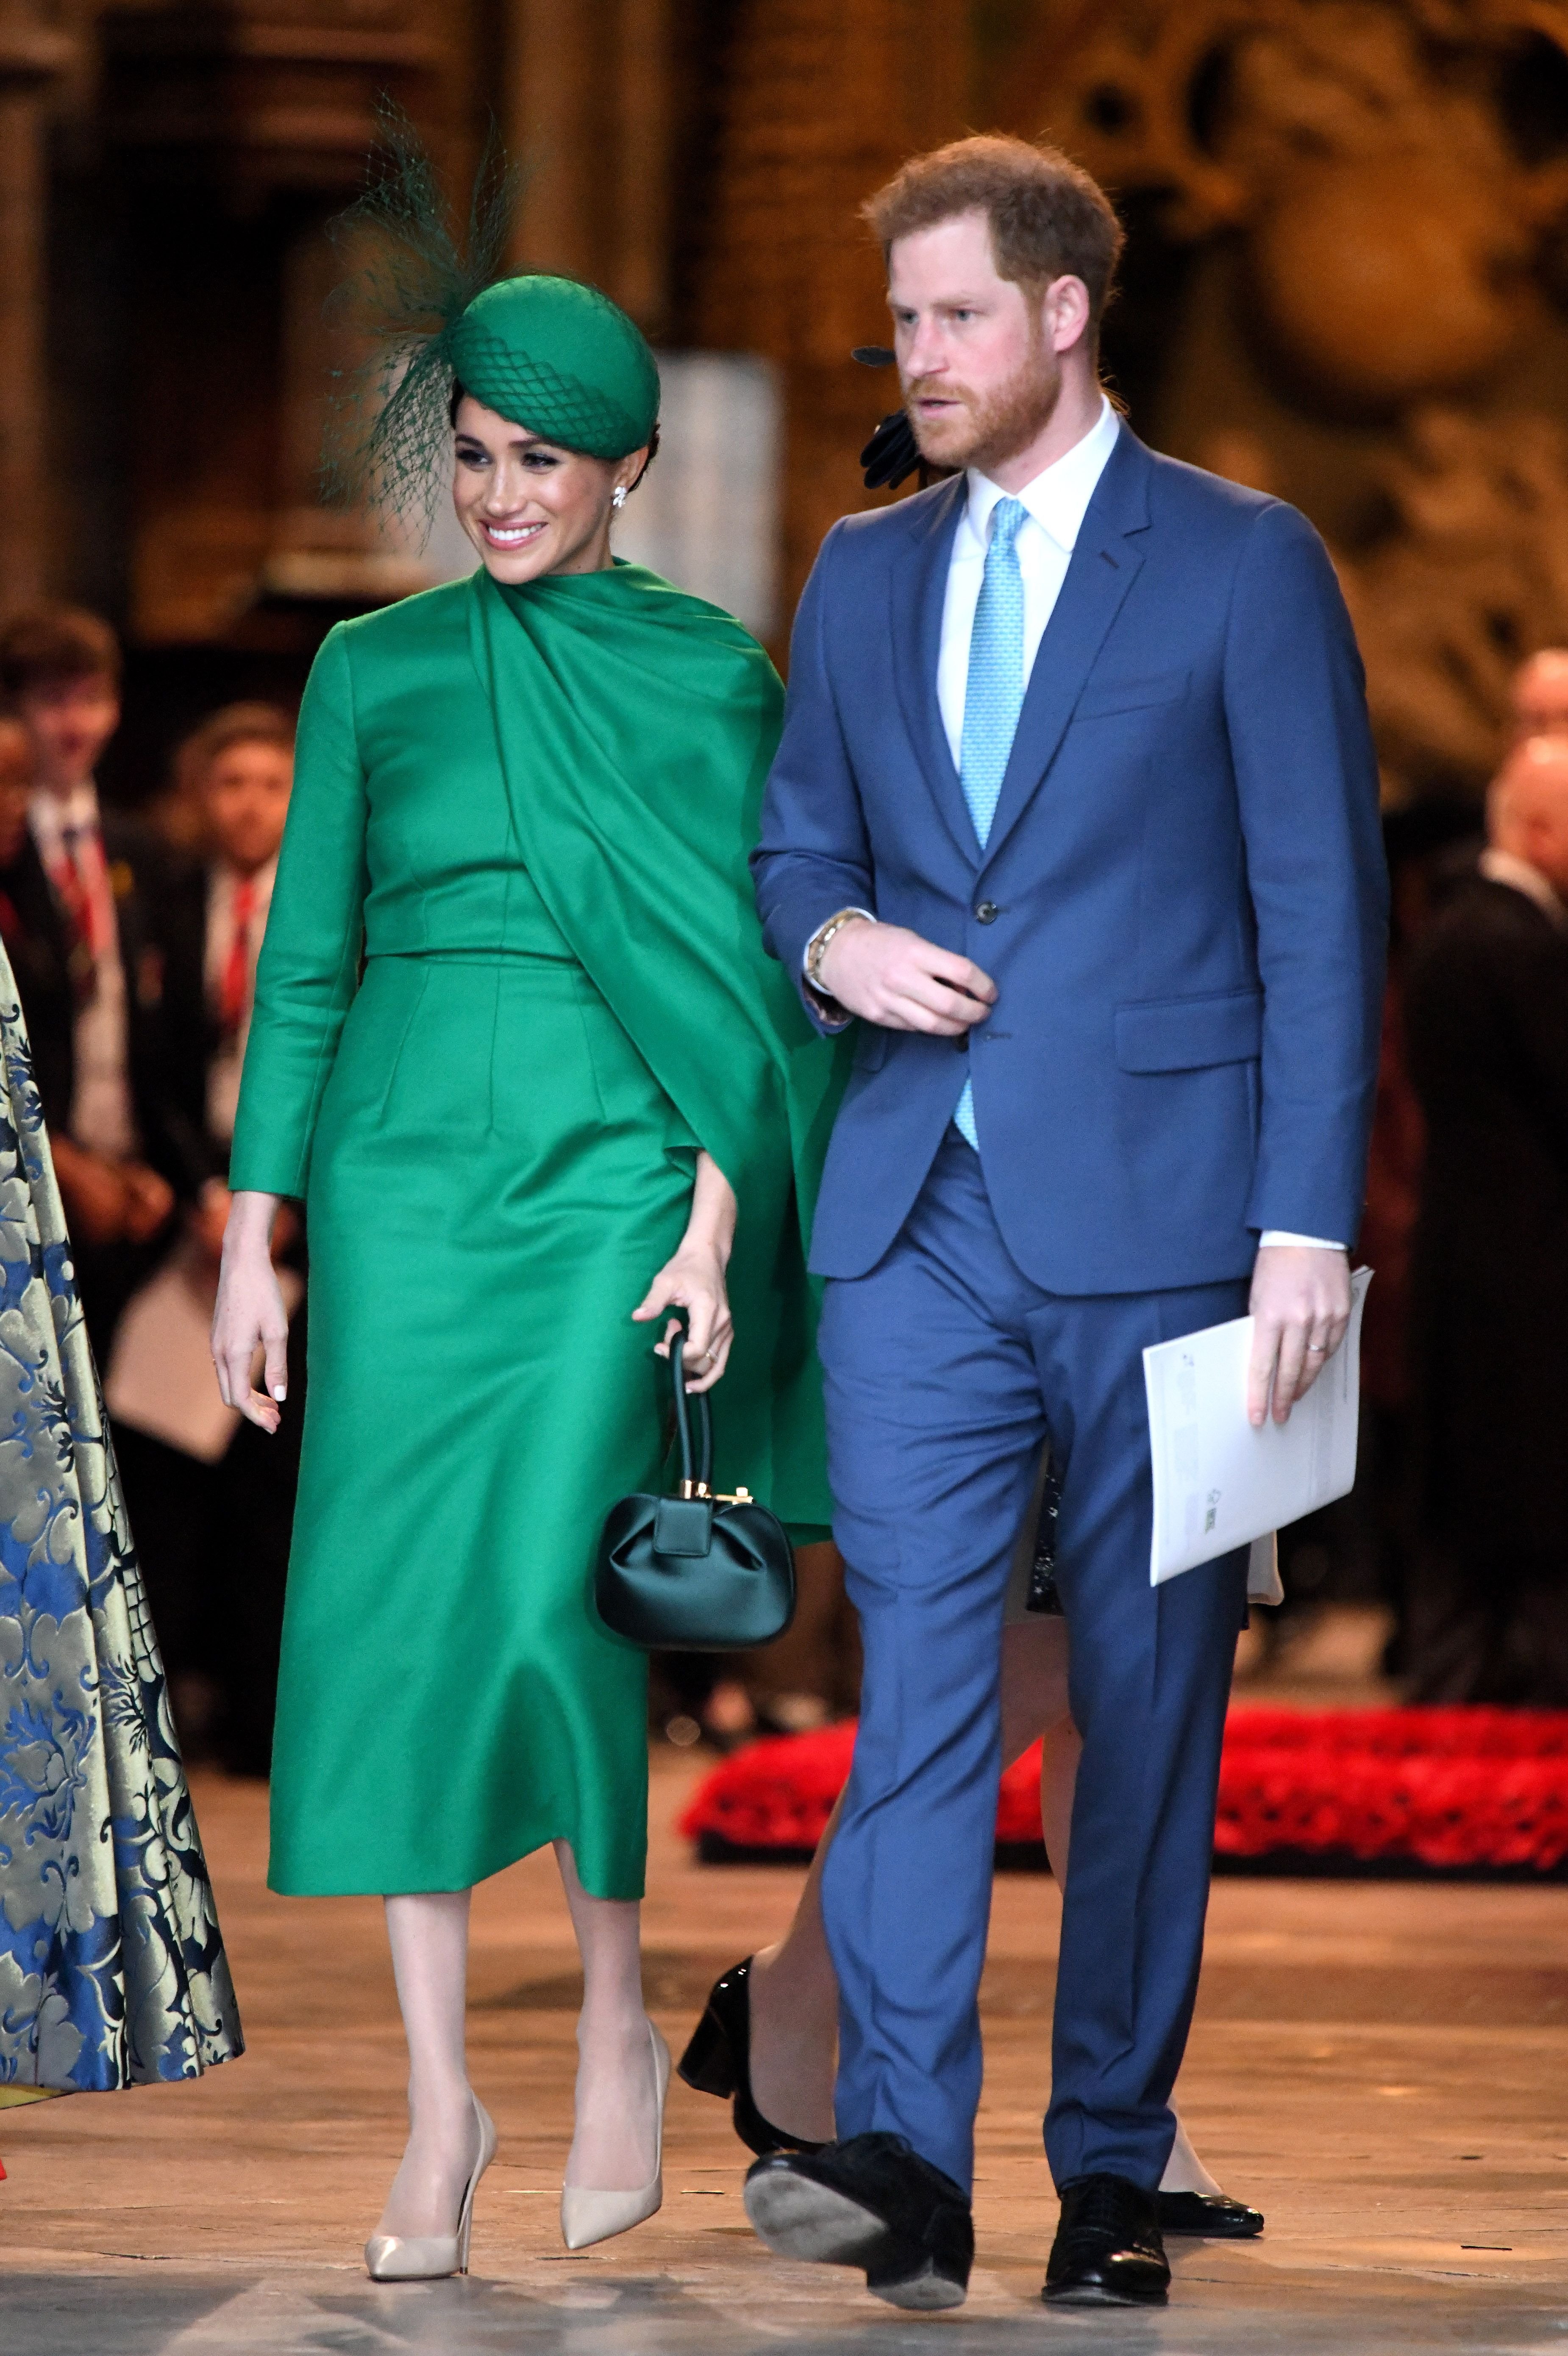 Prince Harry, Duke of Sussex and Meghan, Duchess of Sussex depart after attending the Commonwealth Day Service 2020 at Westminster Abbey on March 09, 2020. | Getty Images